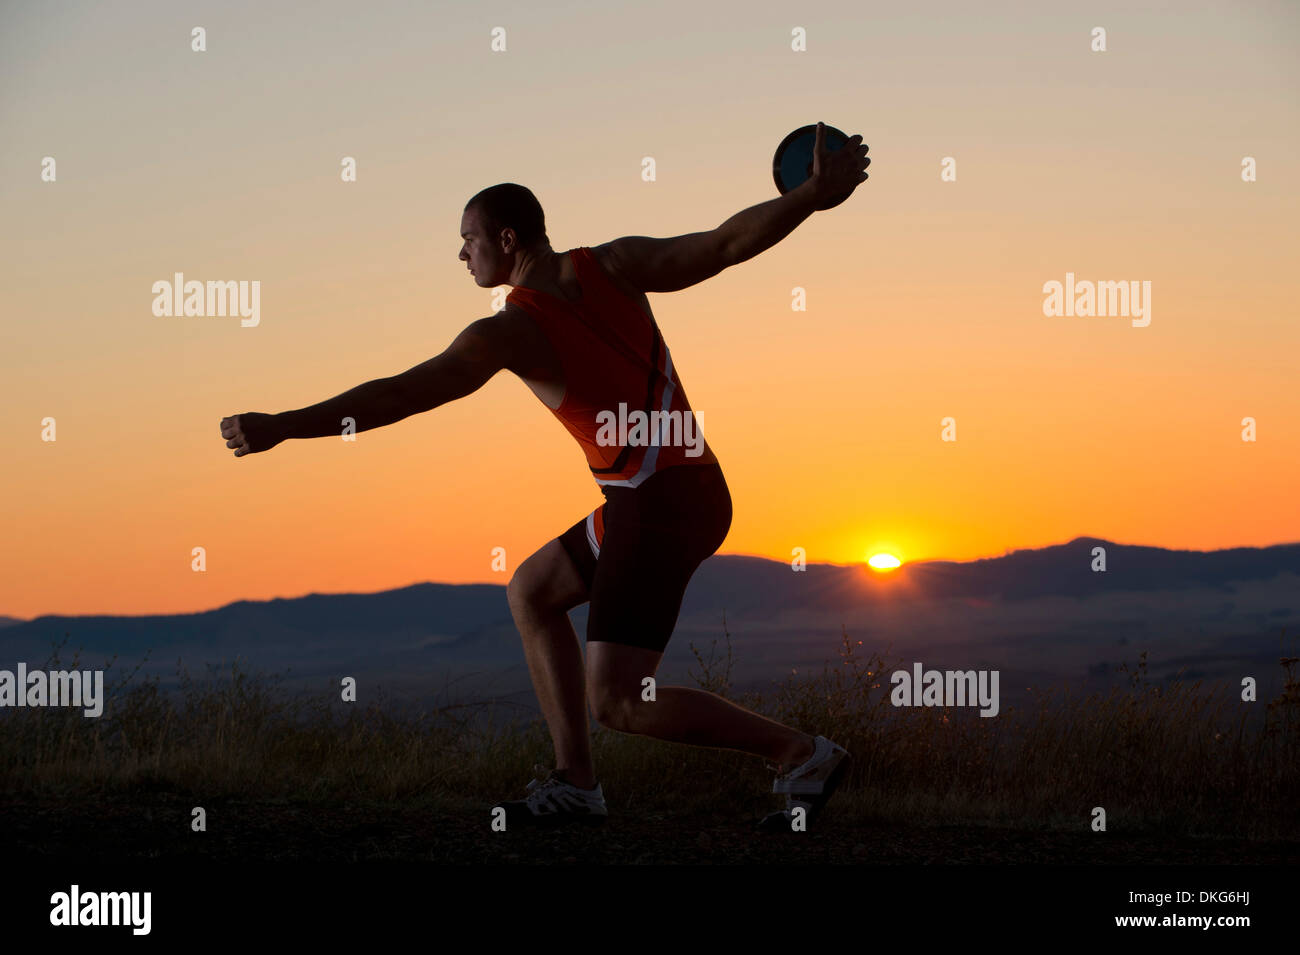 Young man preparing to throw discus at sunset Stock Photo